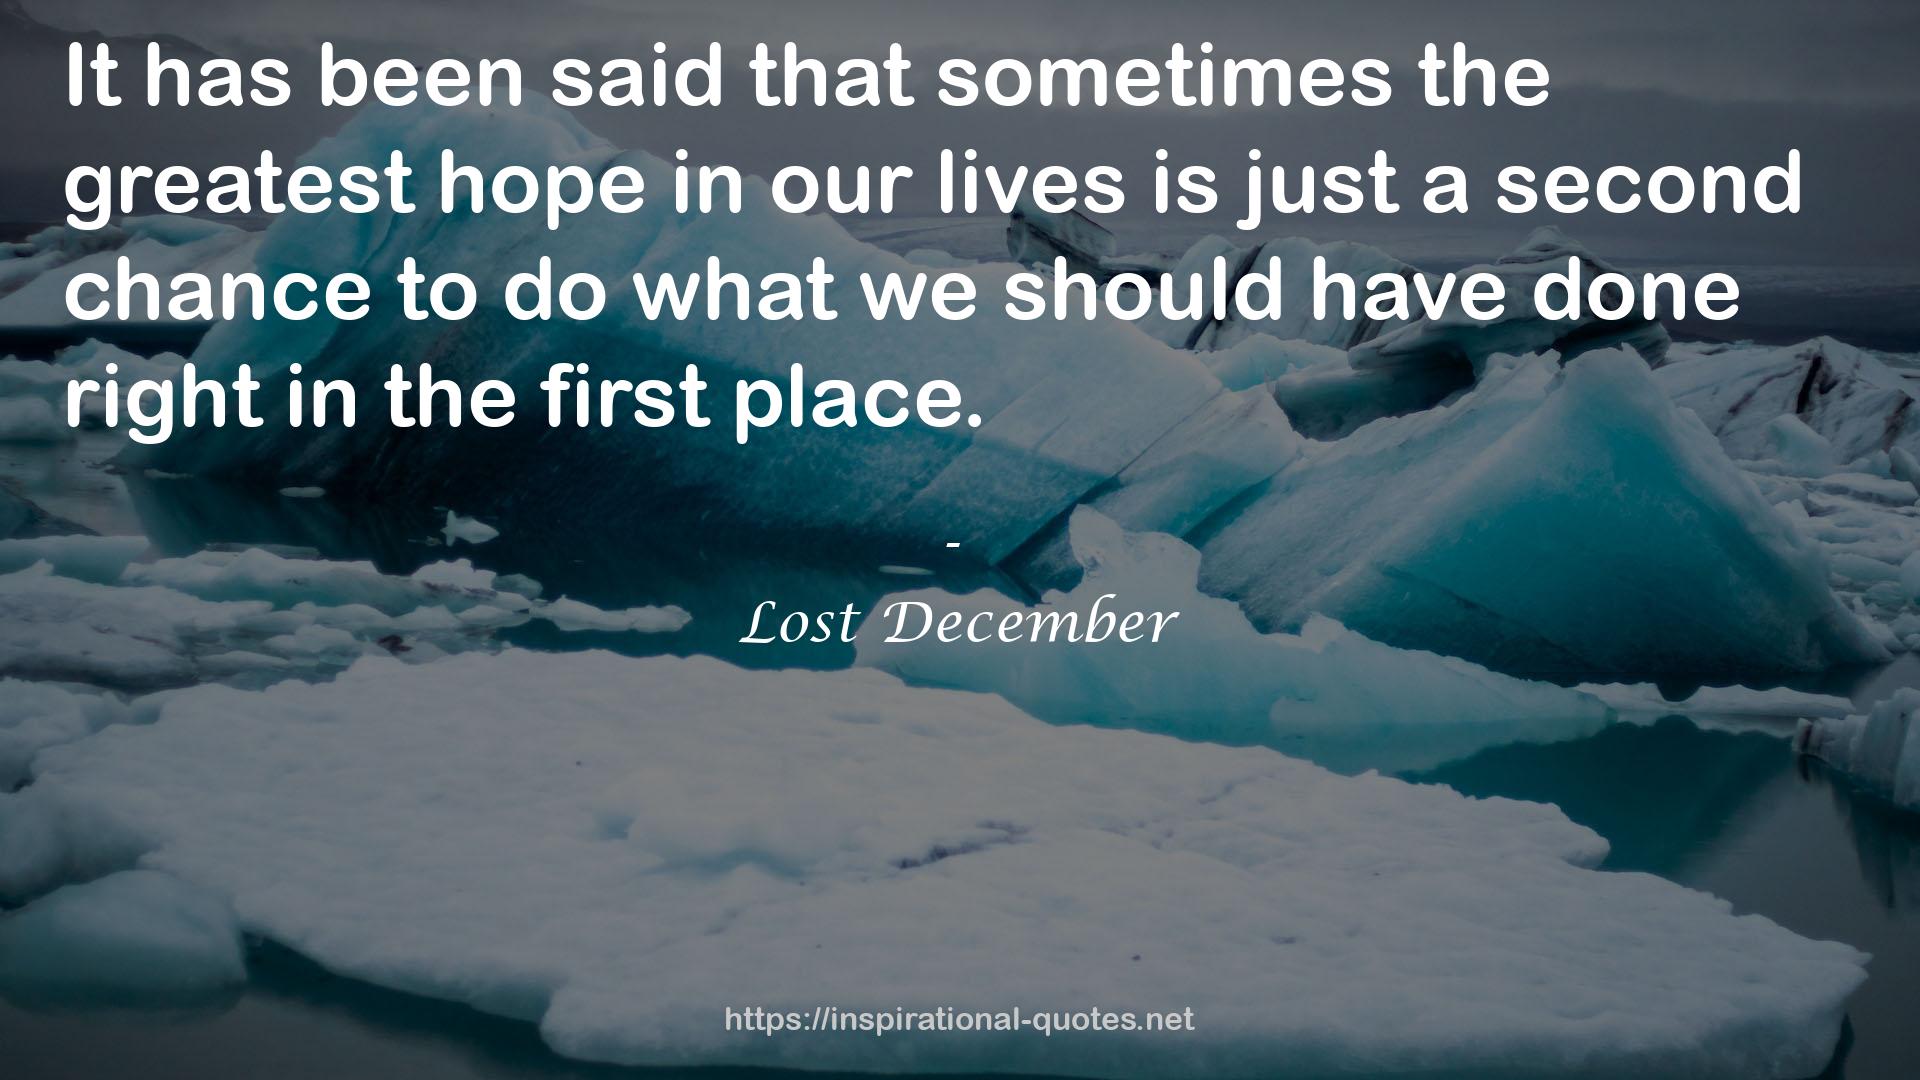 Lost December QUOTES